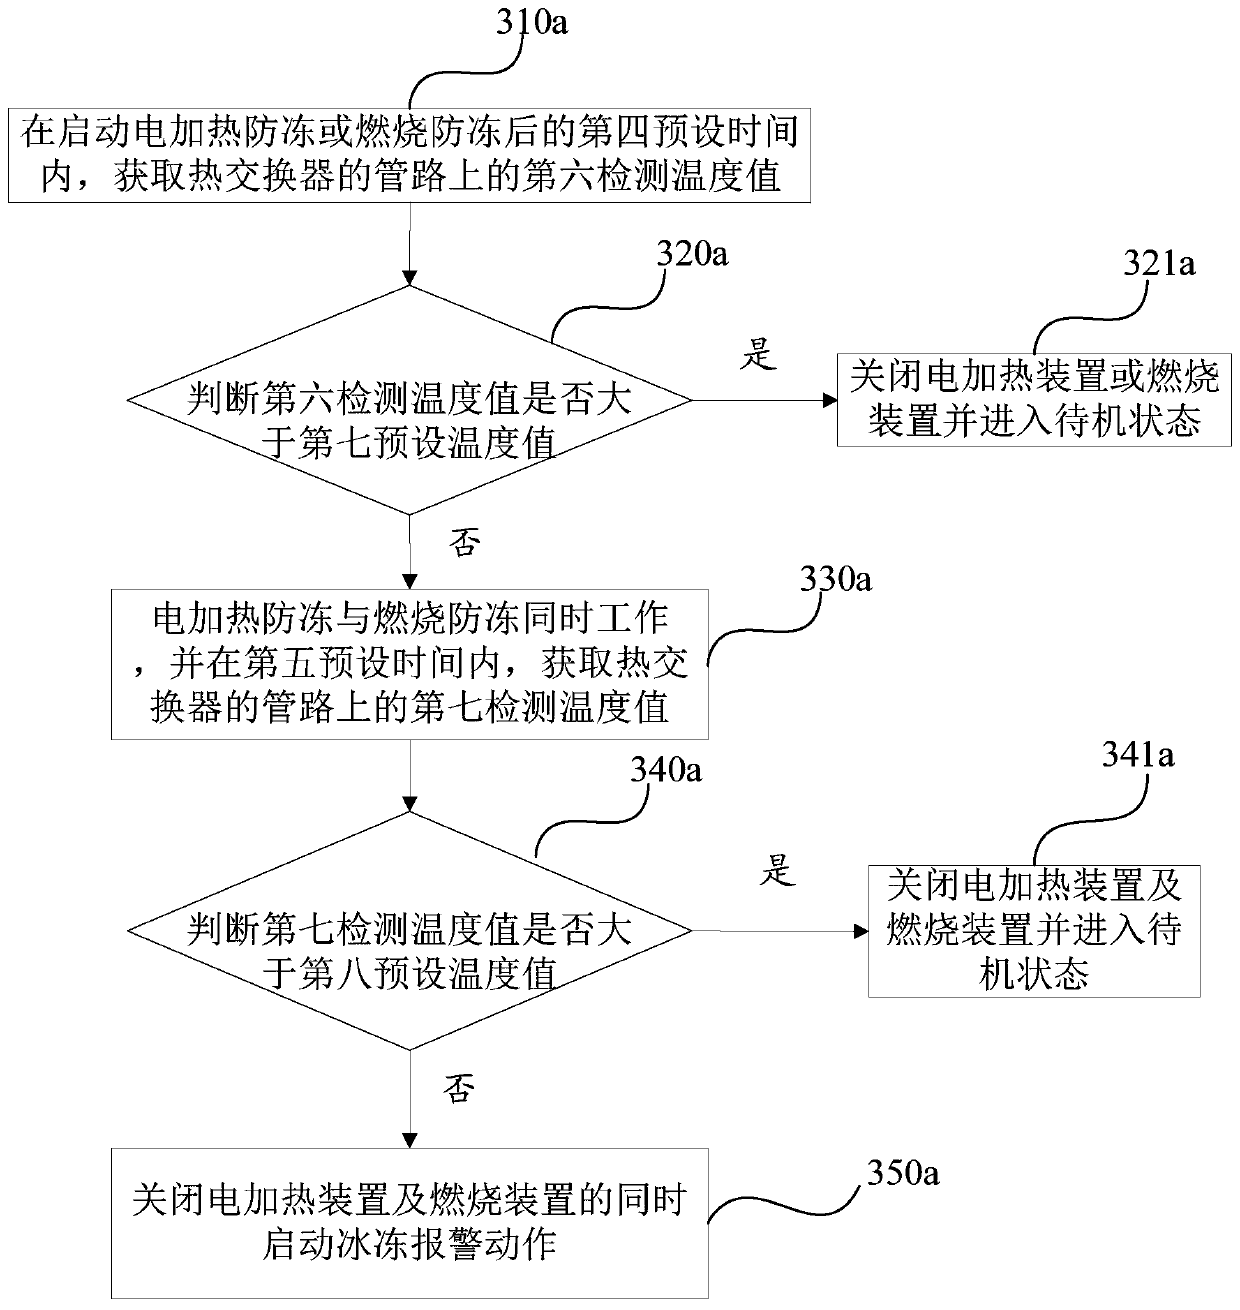 Anti-freezing method, anti-freezing control system and gas water heater